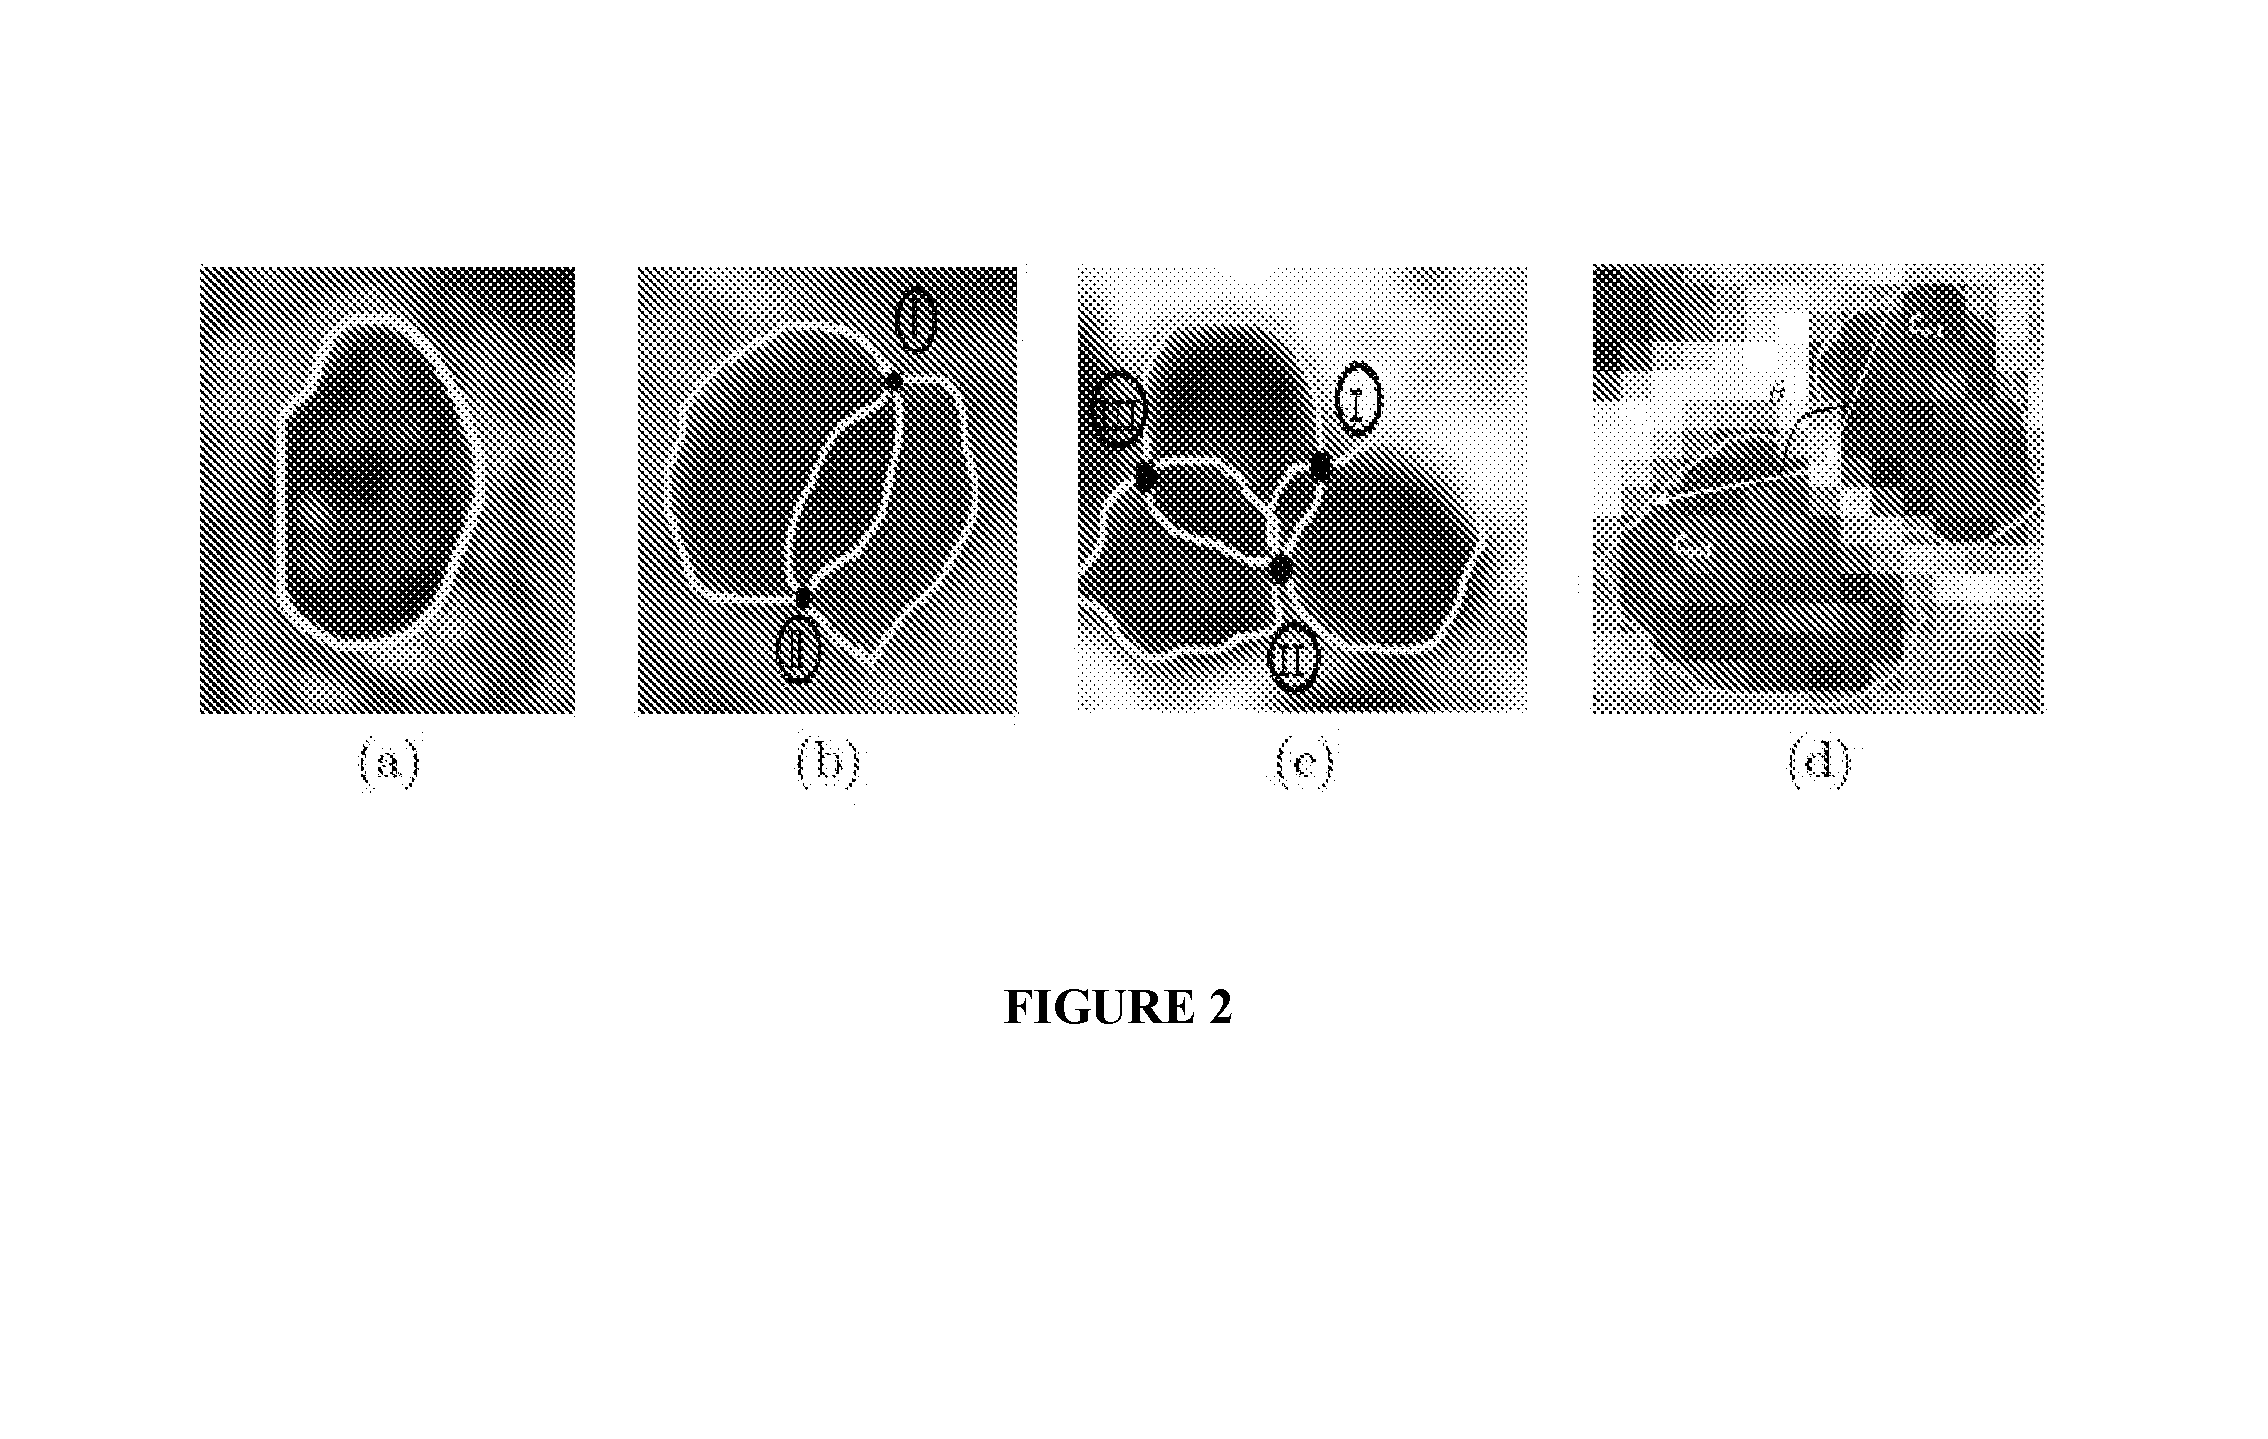 Method and apparatus for shape based deformable segmentation of multiple overlapping objects